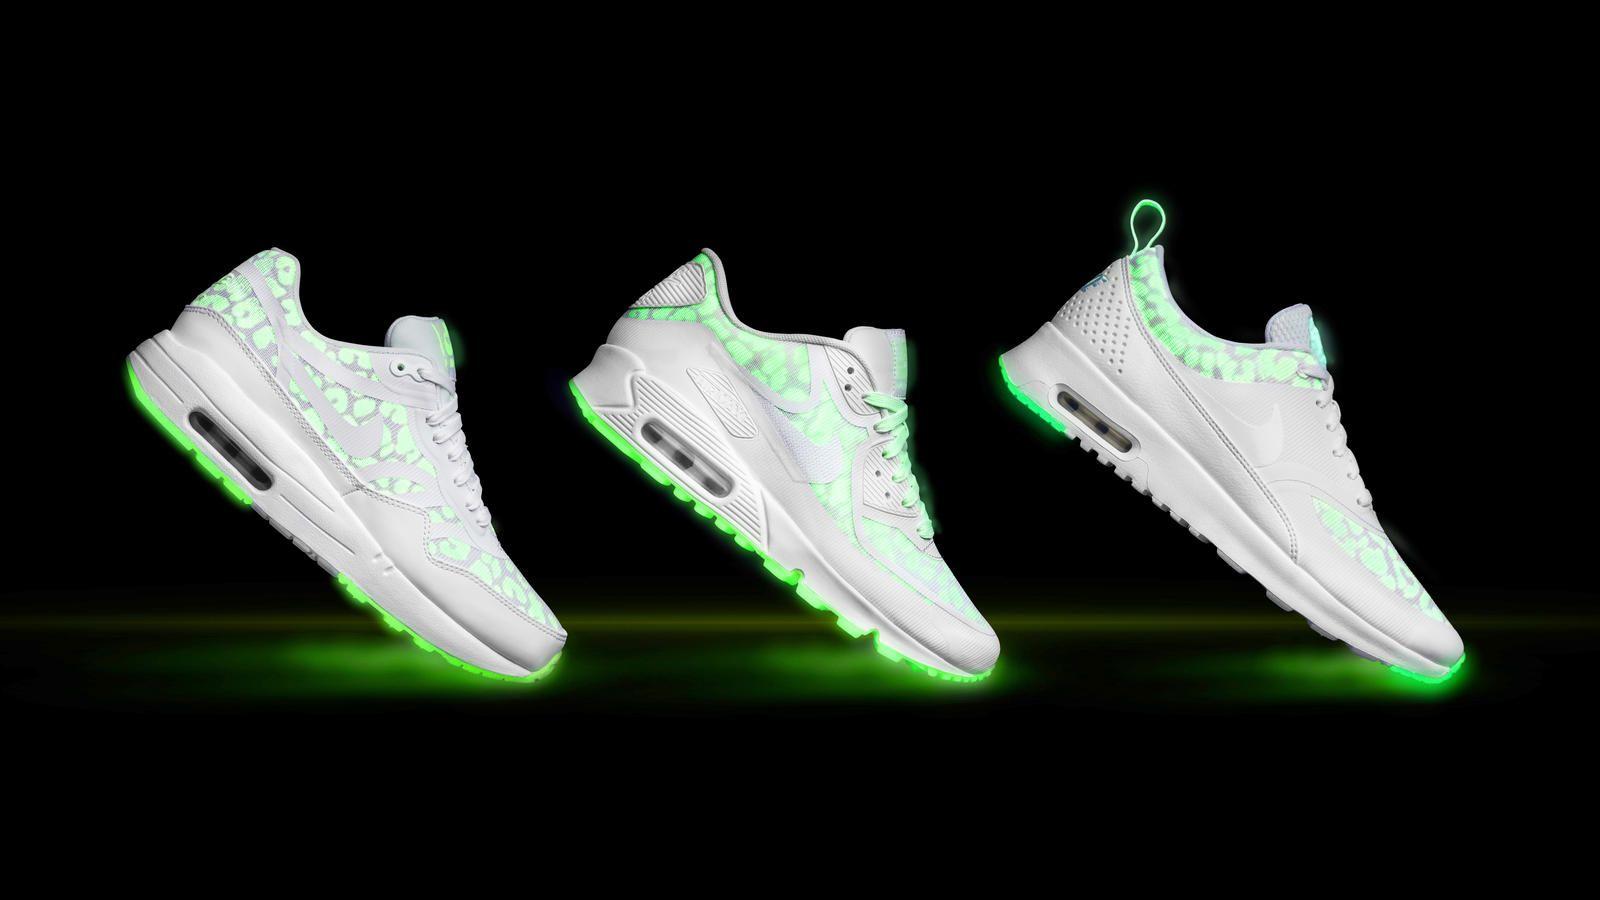 Glow in the Dark Nike Logo - Visible Air Just Got More Visible: The Nike Air Max Glow Collection